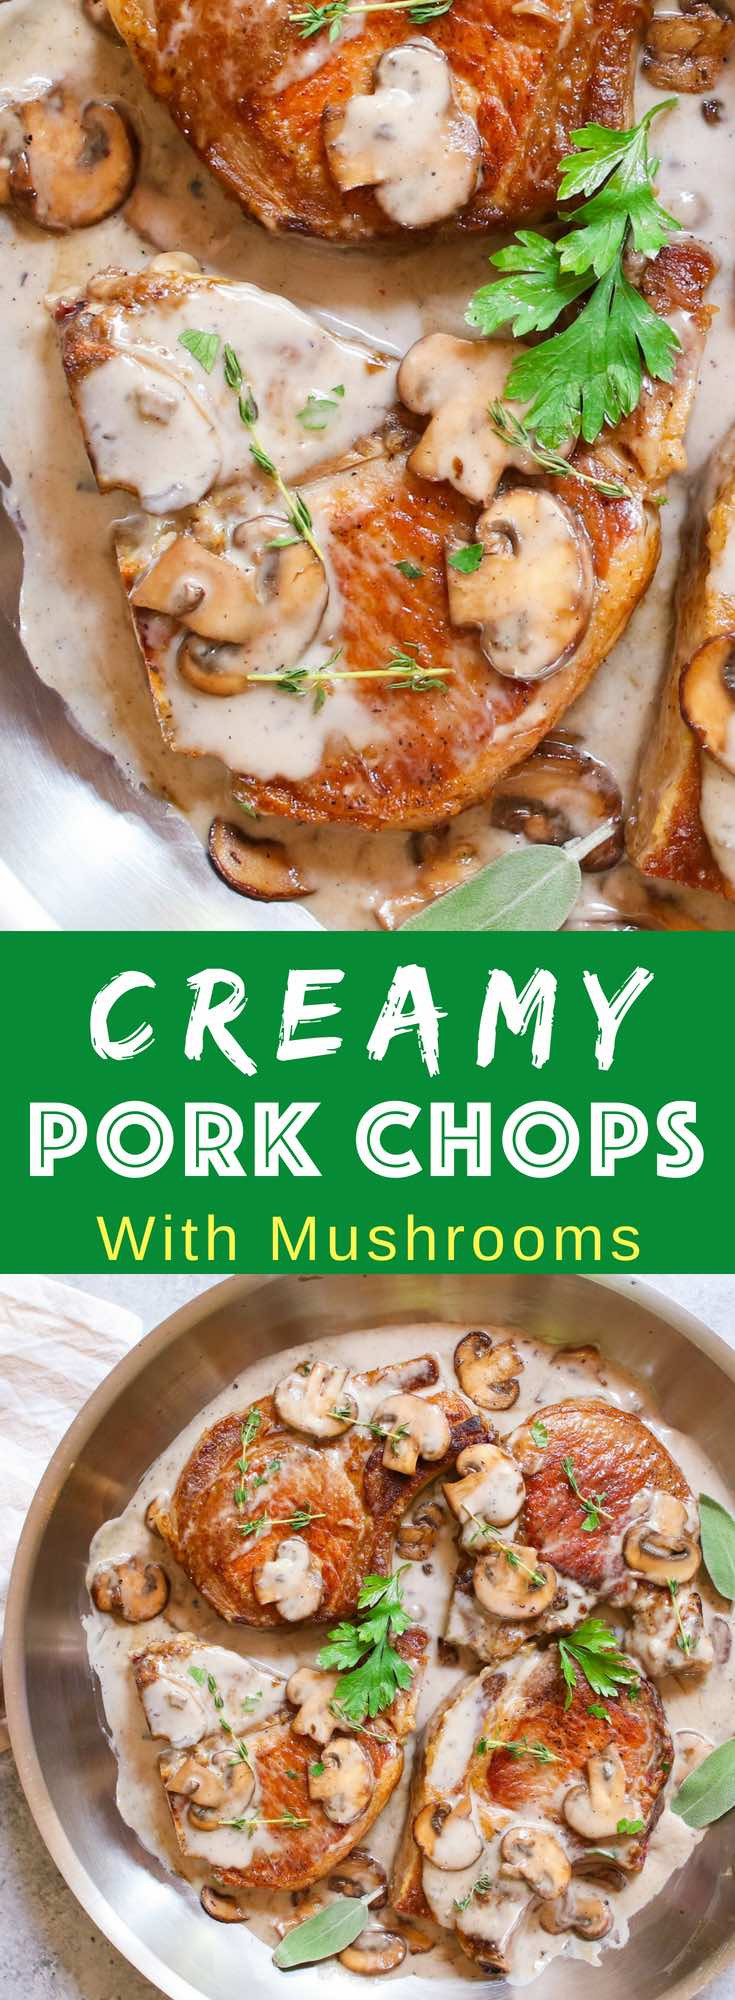 Slow Cooker Smothered Pork Chops Cream Of Mushroom
 Easy Cream of Mushroom Pork Chops Recipe